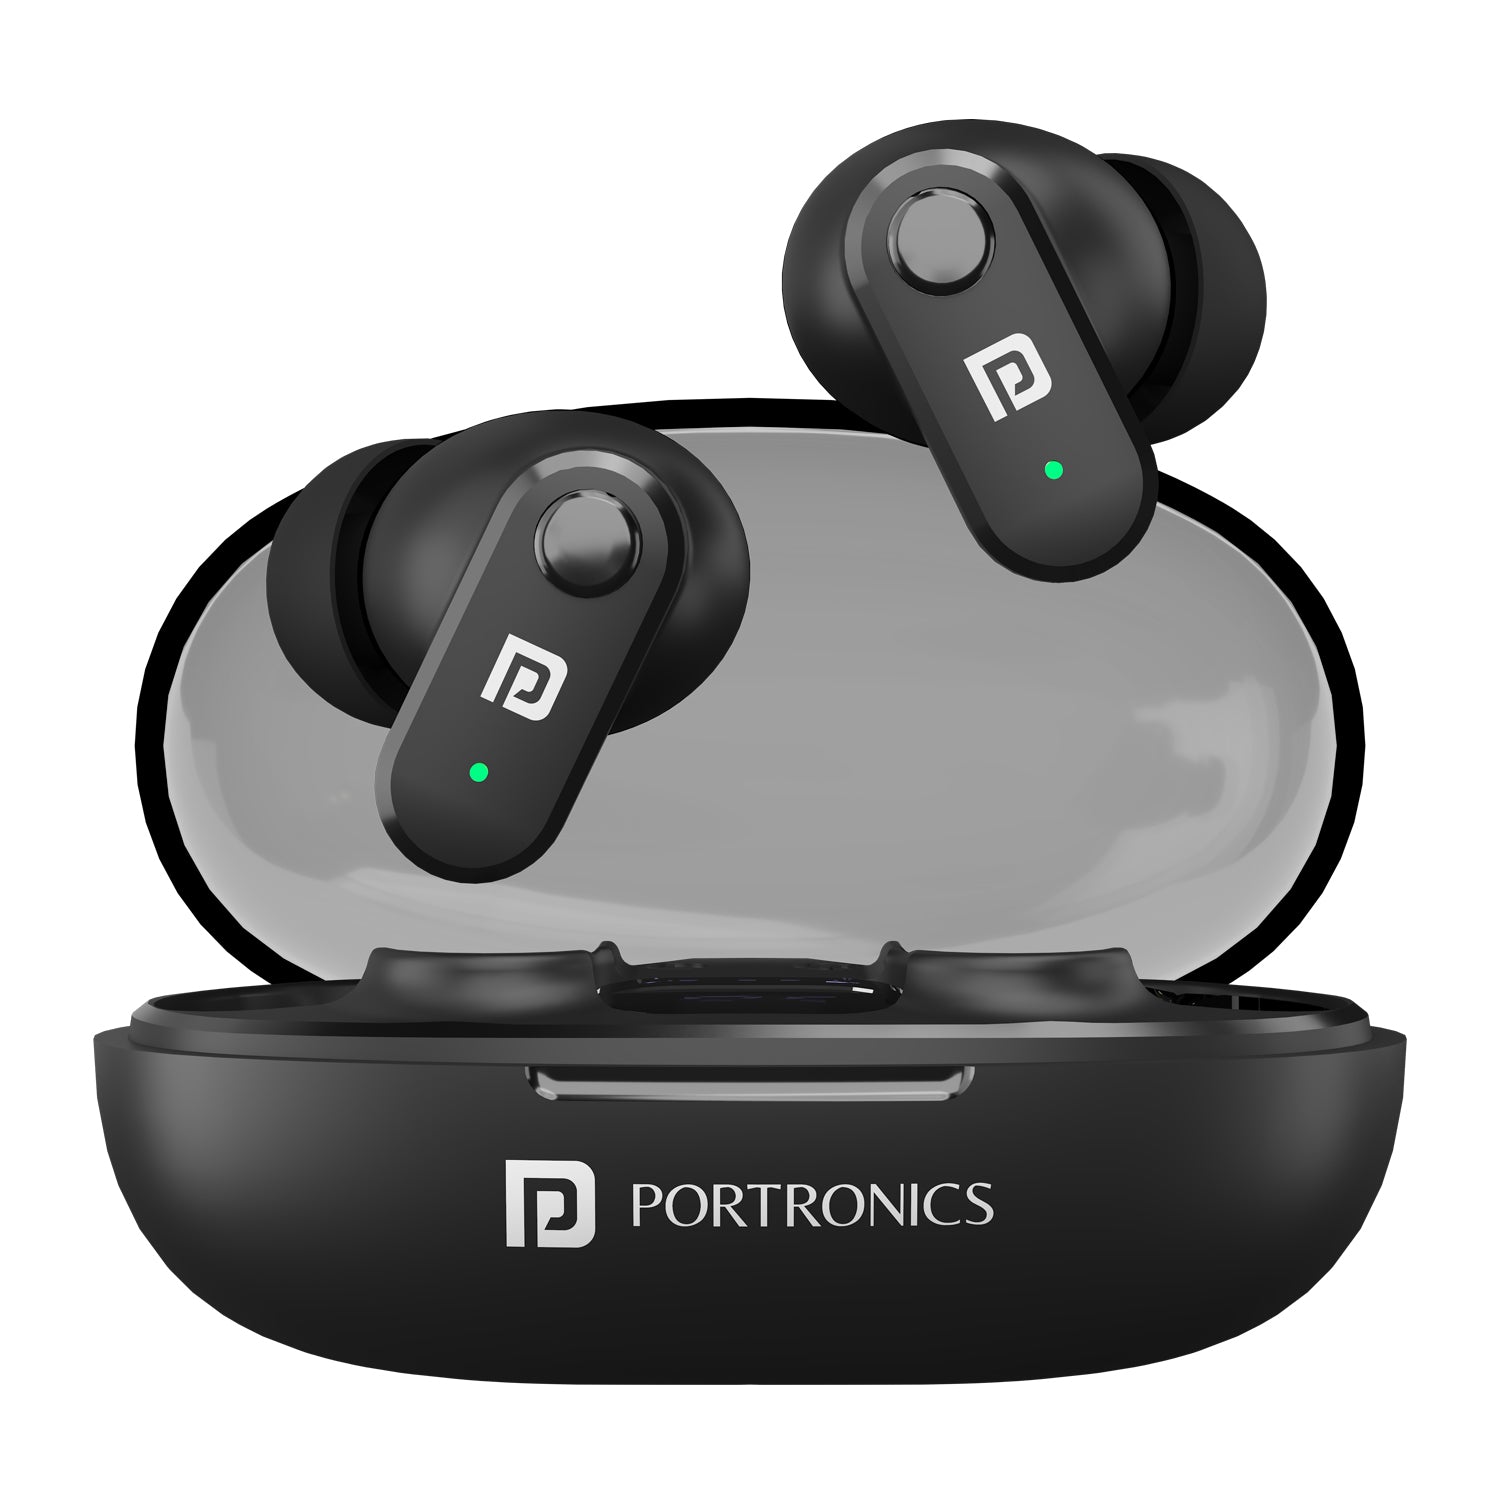 Portronics Harmonics Twins s16 Smart wireless TWS earbuds| earbuds with noise cancelling online| Bluetooth earbuds with mic| best earbuds at affordable price| latest earbuds online